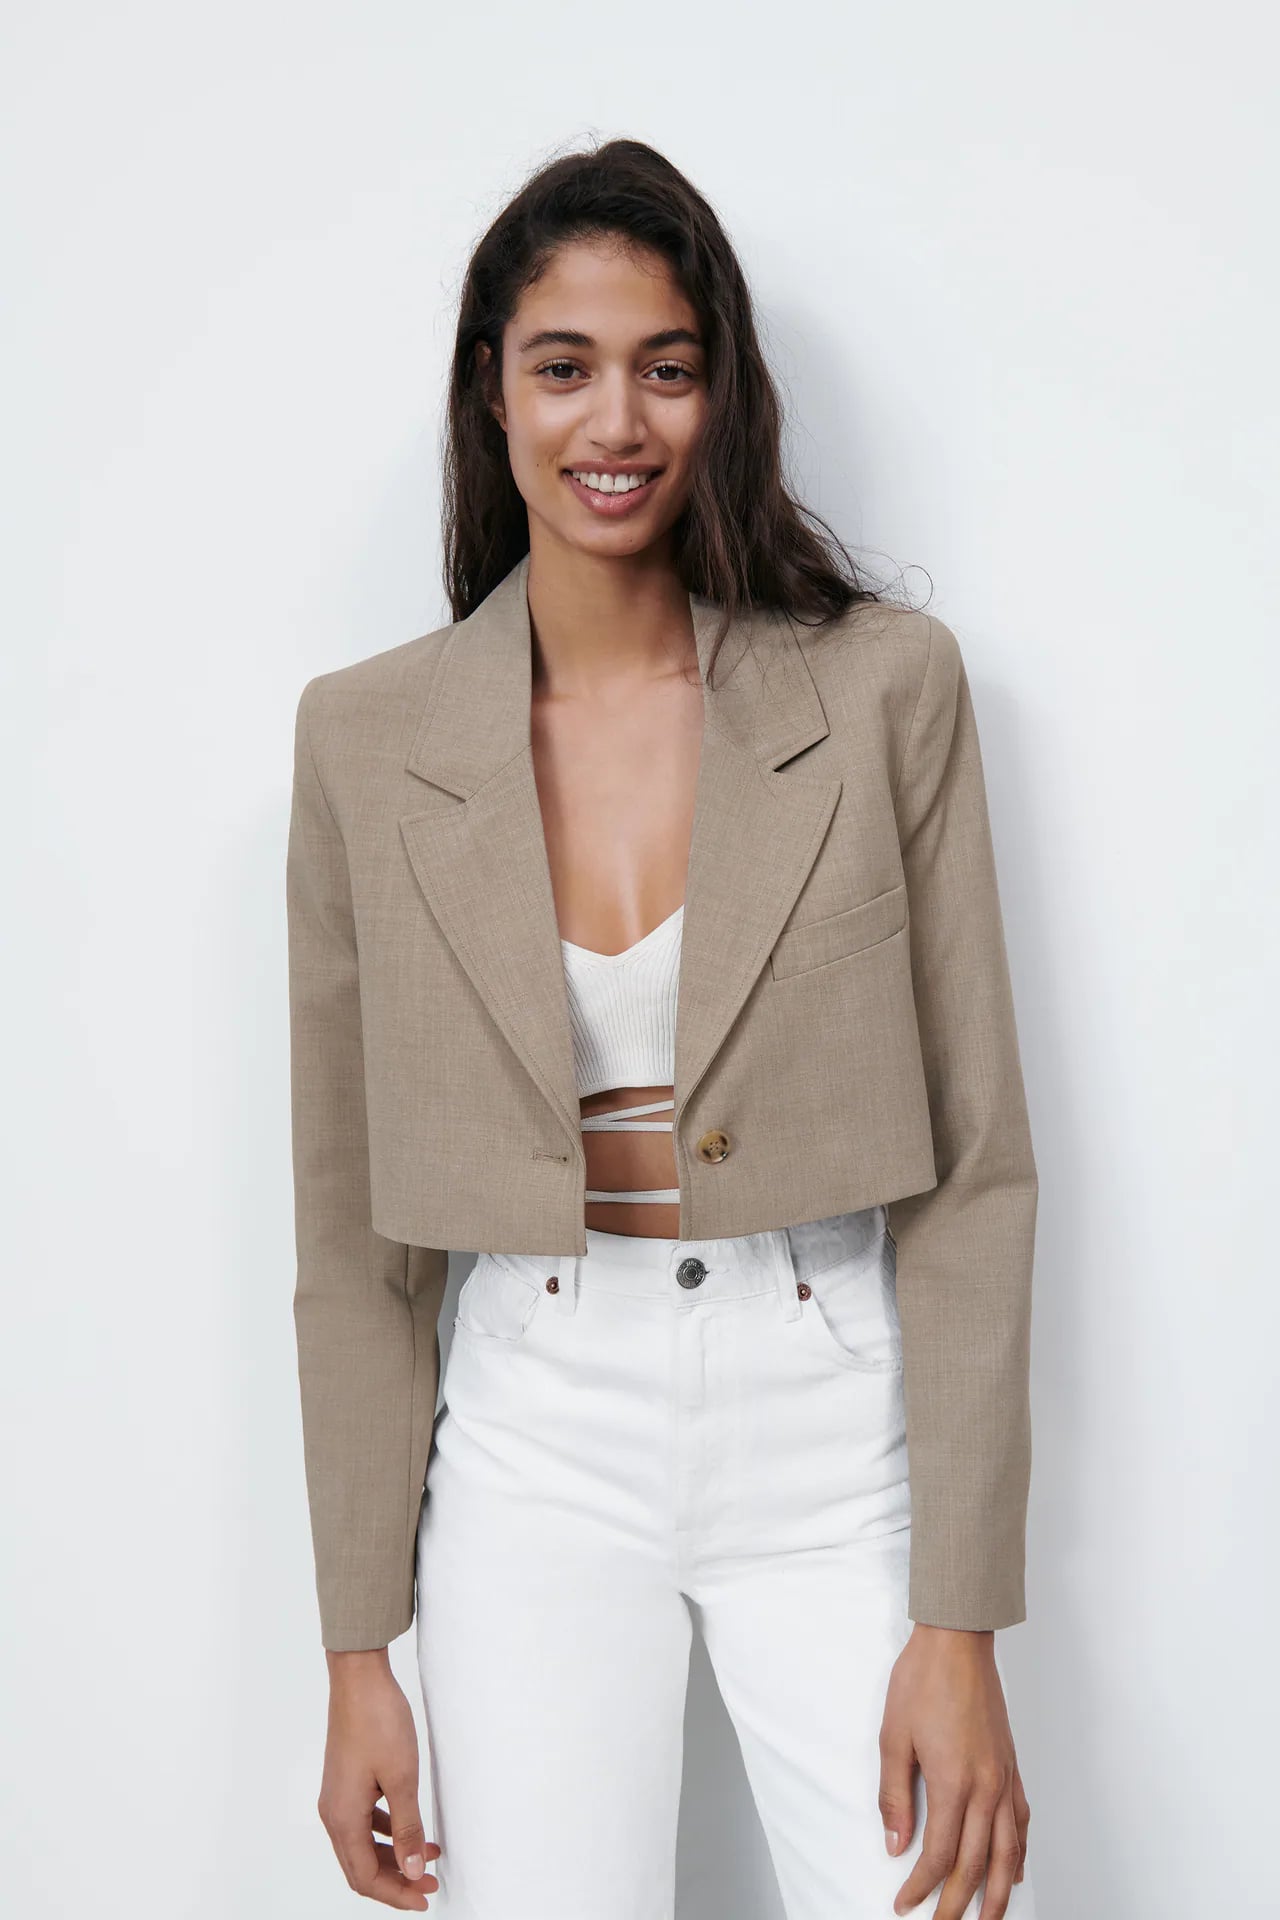 Zara Topstitched Cropped Blazer | 17 Blazers That Are Undeniably Chic,  Comfortable, and Great For Spring and Summer | POPSUGAR Fashion Photo 4